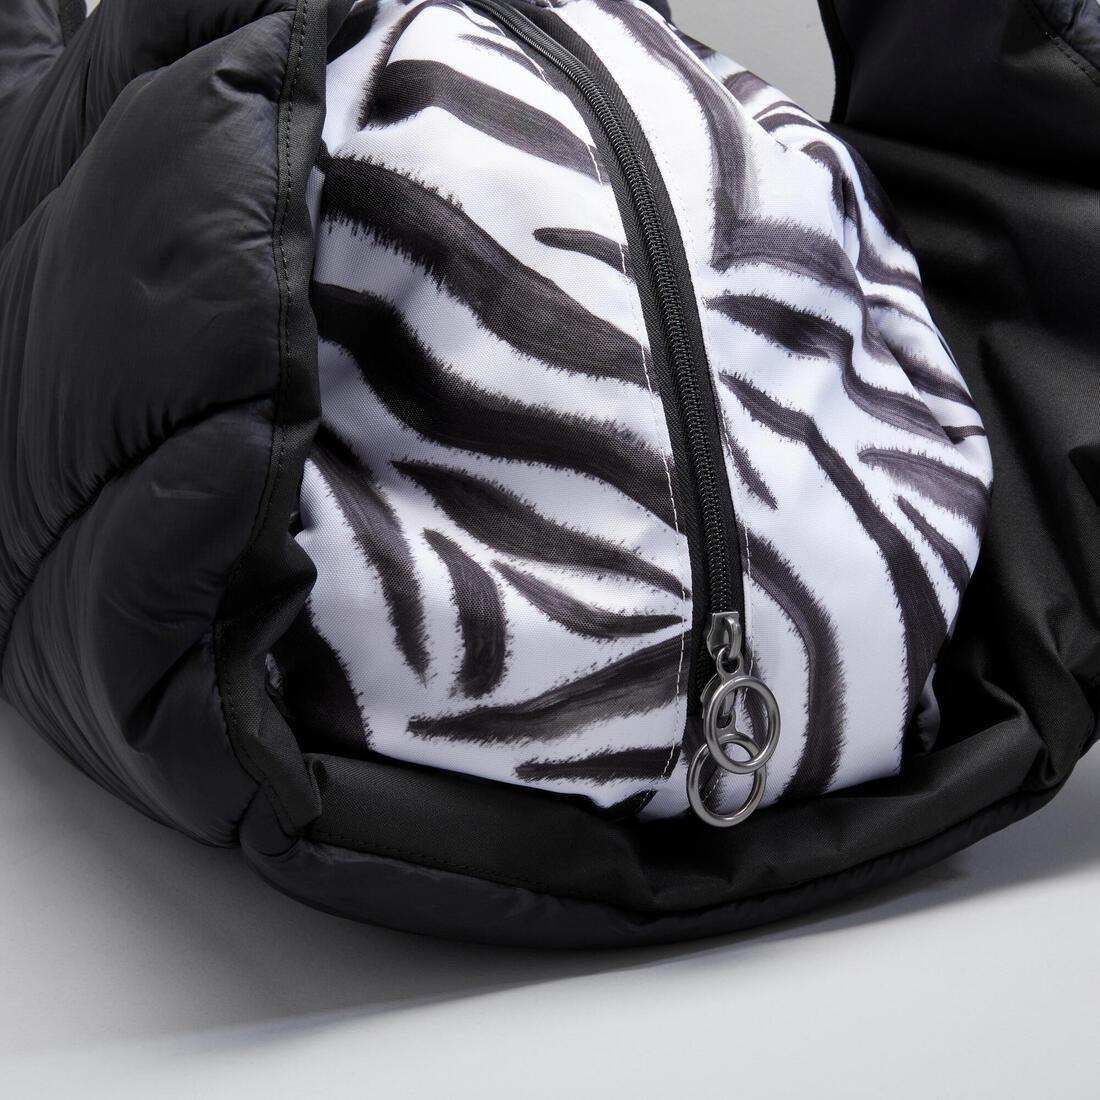 DOMYOS - This bag is one of the range's originals - but is still ultra-functional!, Black